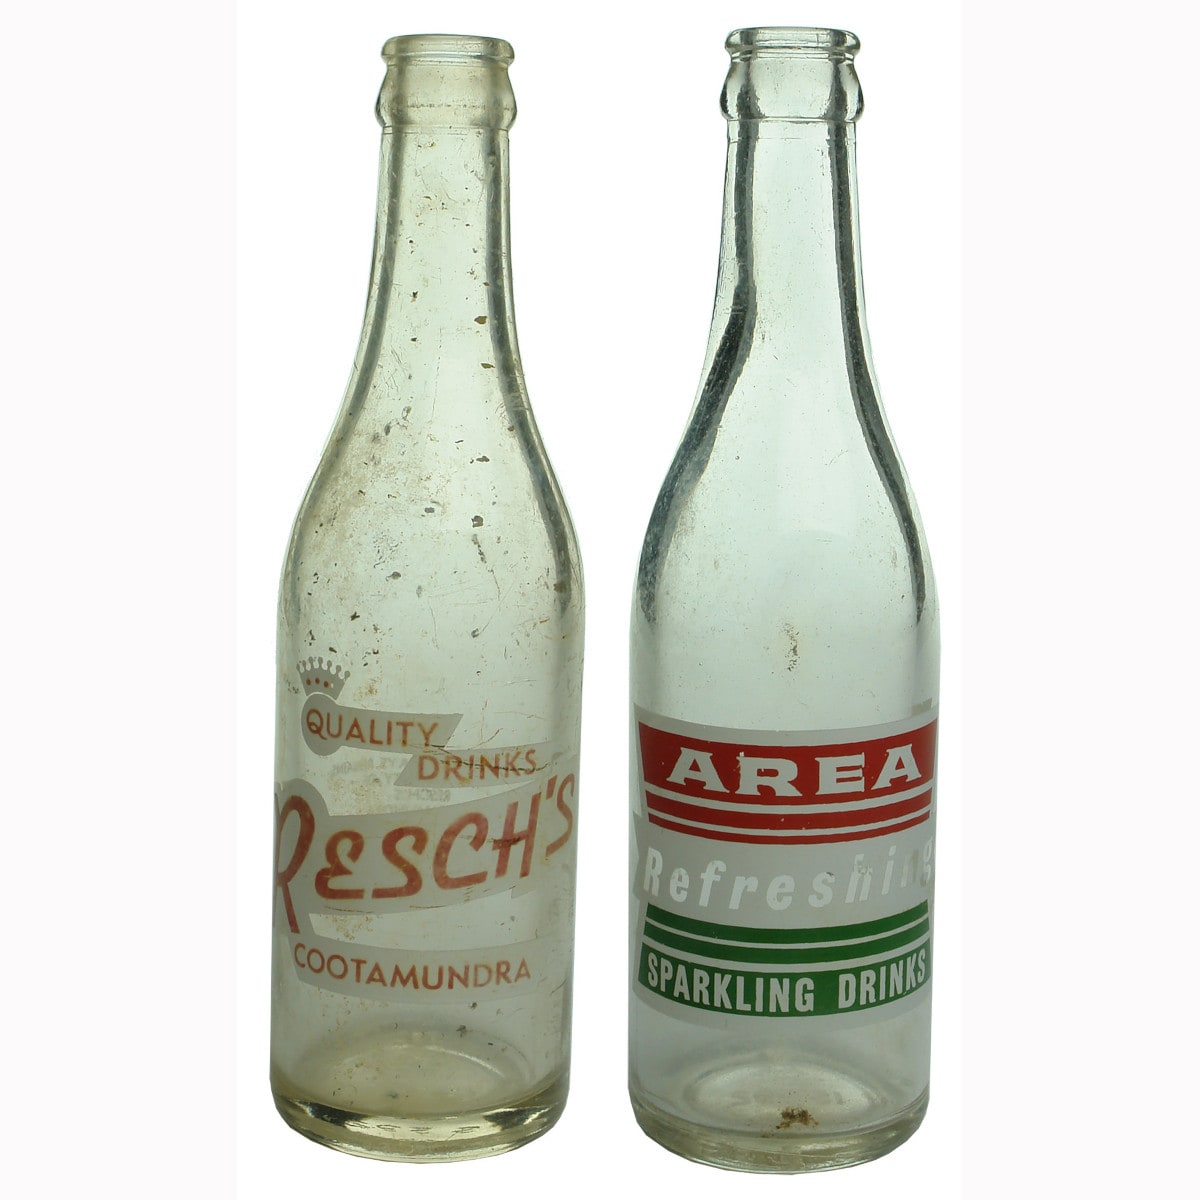 Two Ceramic Label Crown Seals: Resch's Cootamundra and Area Refreshing Sparkling Drinks.